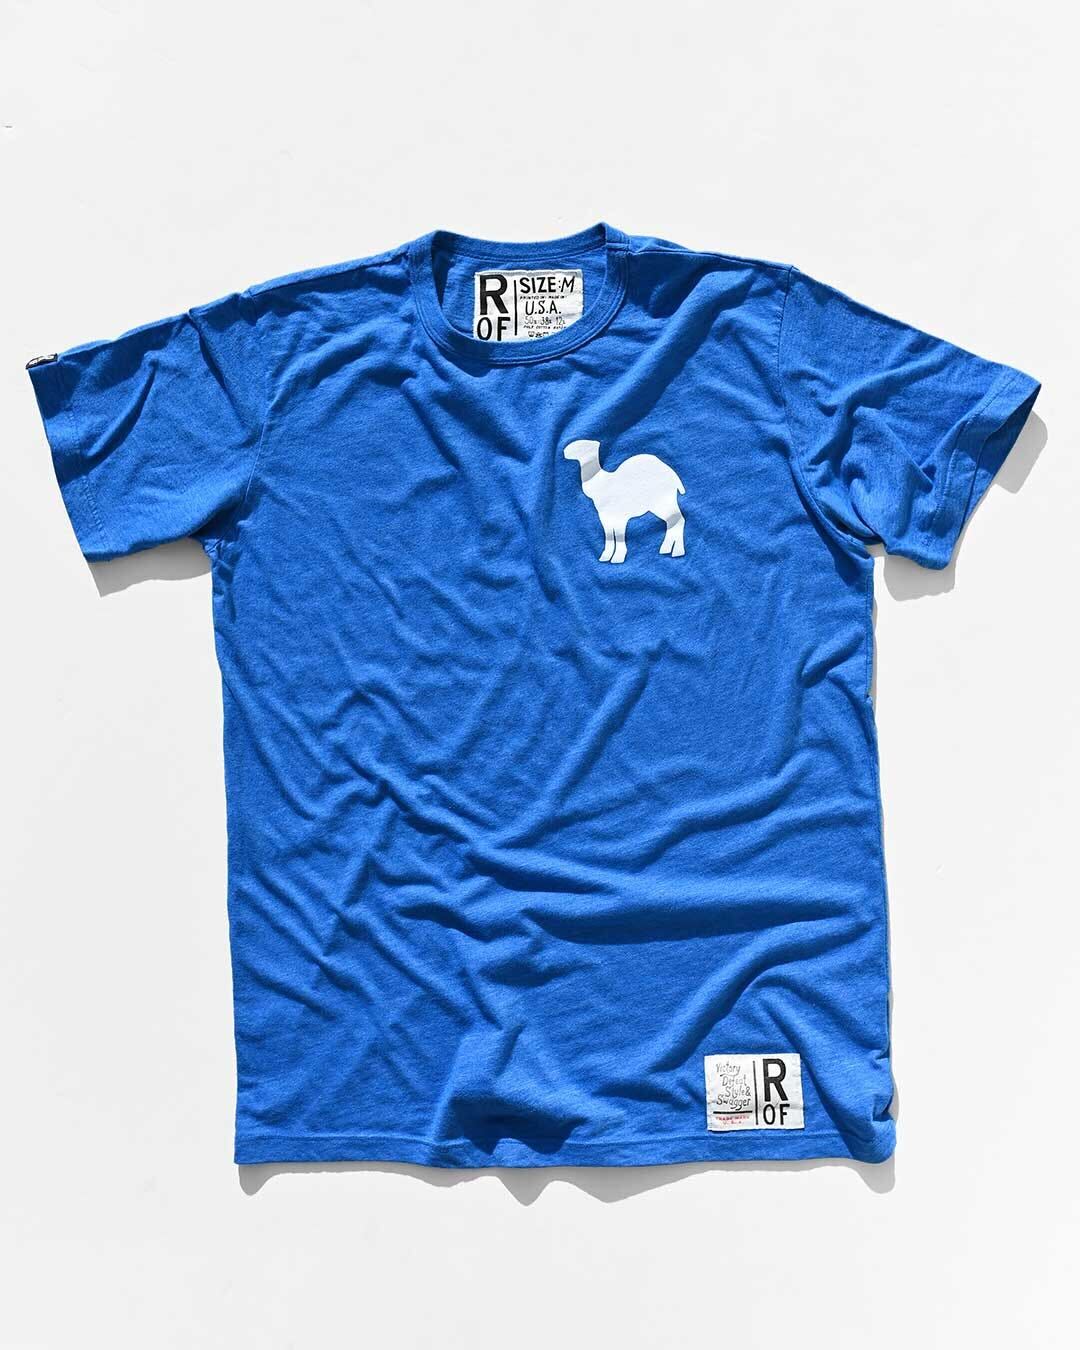 Iron Sheik 1984 Wrestling Blue Tee - Roots of Fight Canada